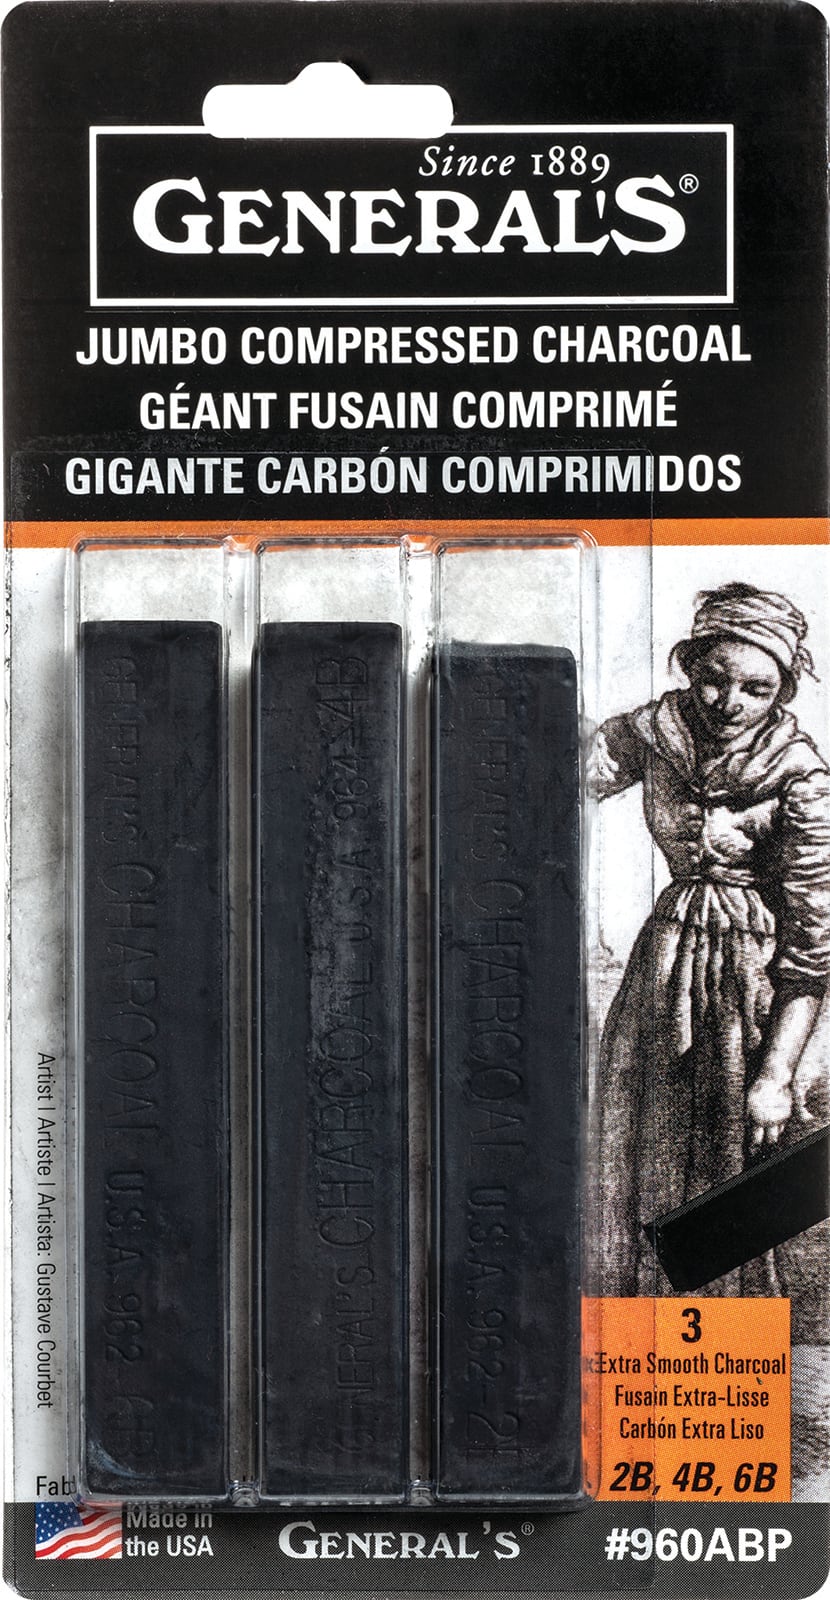 General's® Jumbo Compressed Charcoal Sticks, 3ct.